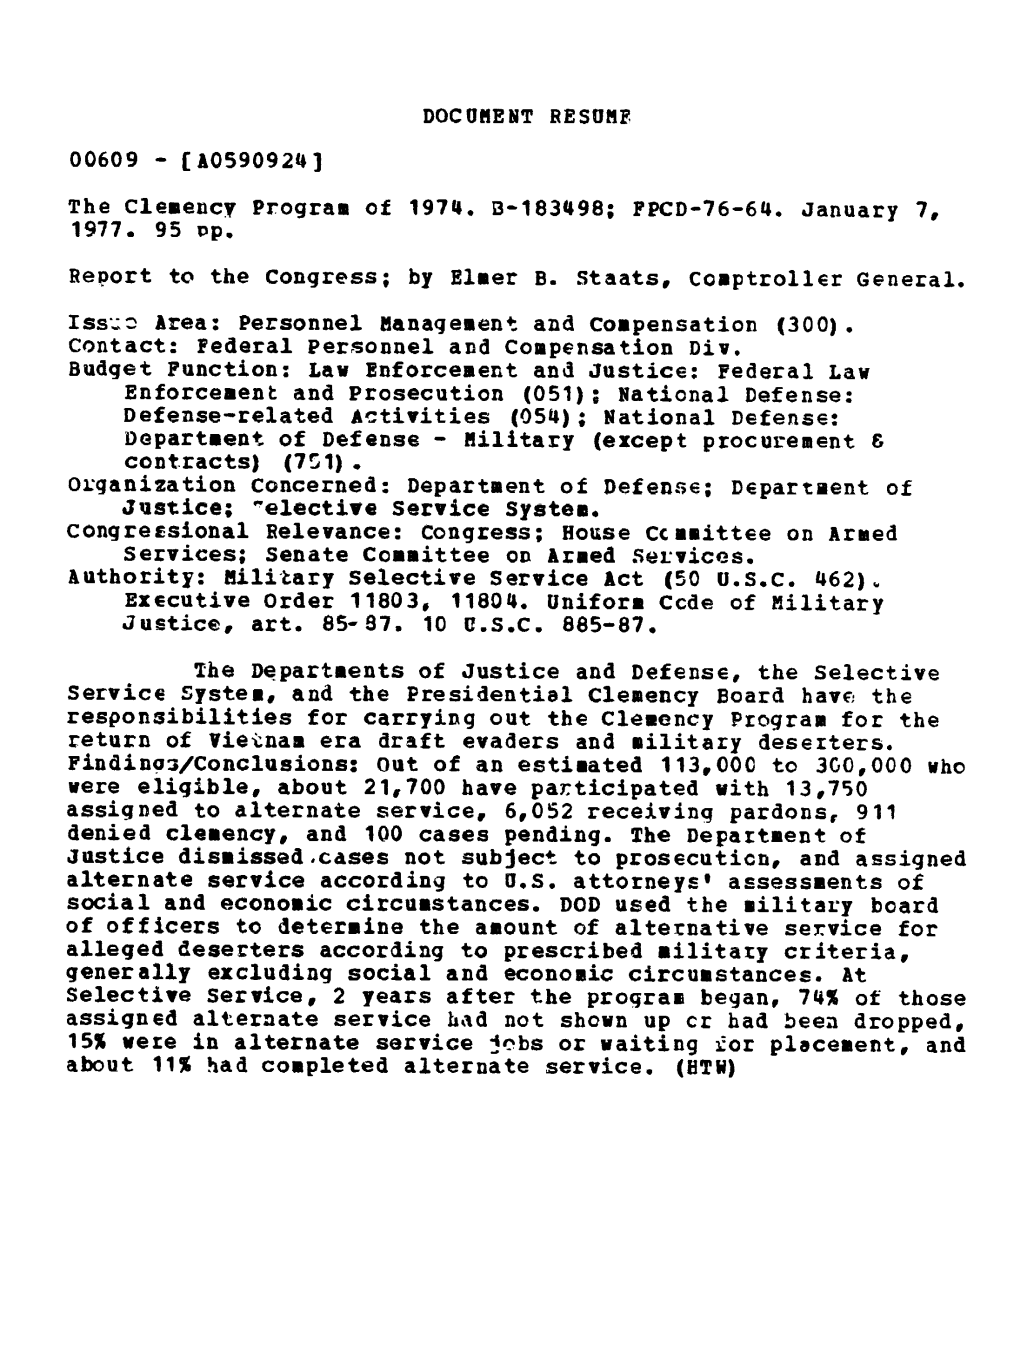 FPCD-76-64 the Clemency Program of 1974